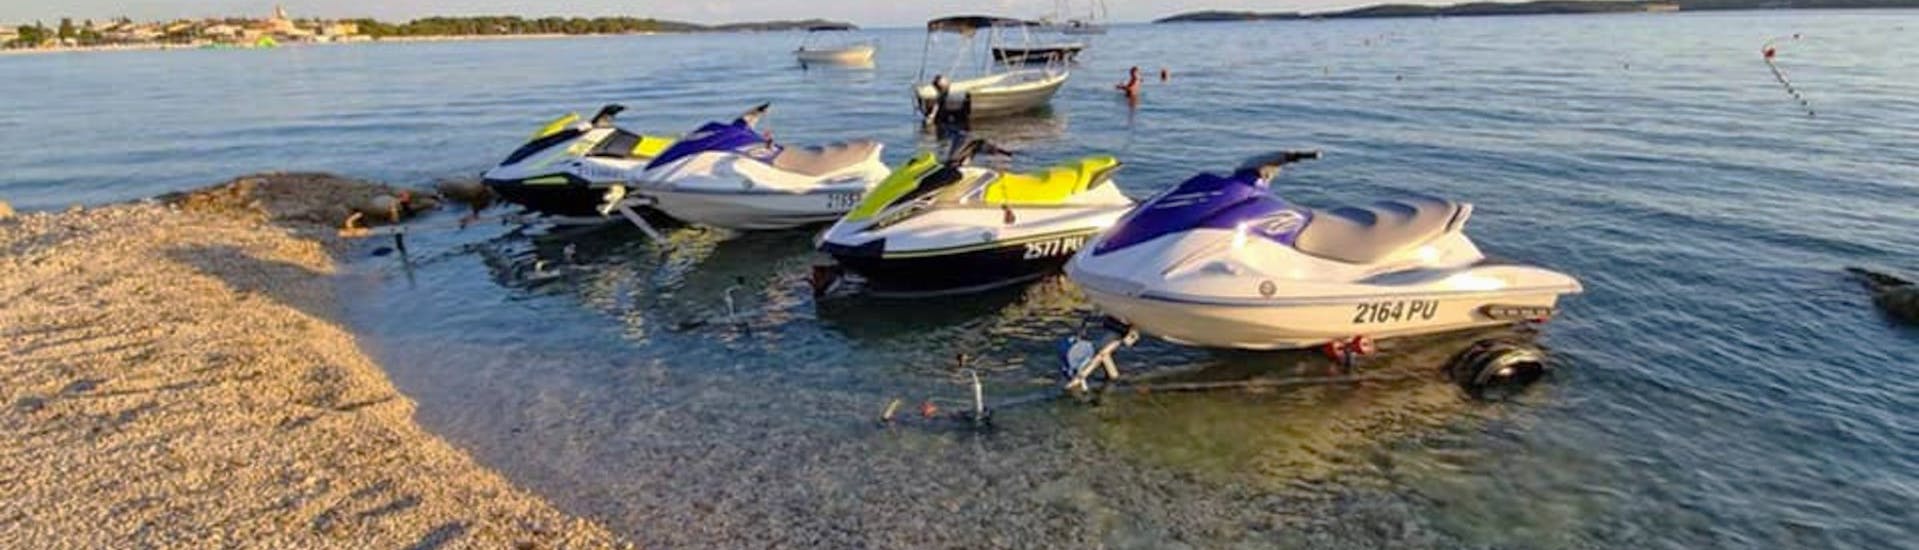 Here are some of the jet skis you can use for the jet ski safari with Alex Rentals Fažana.